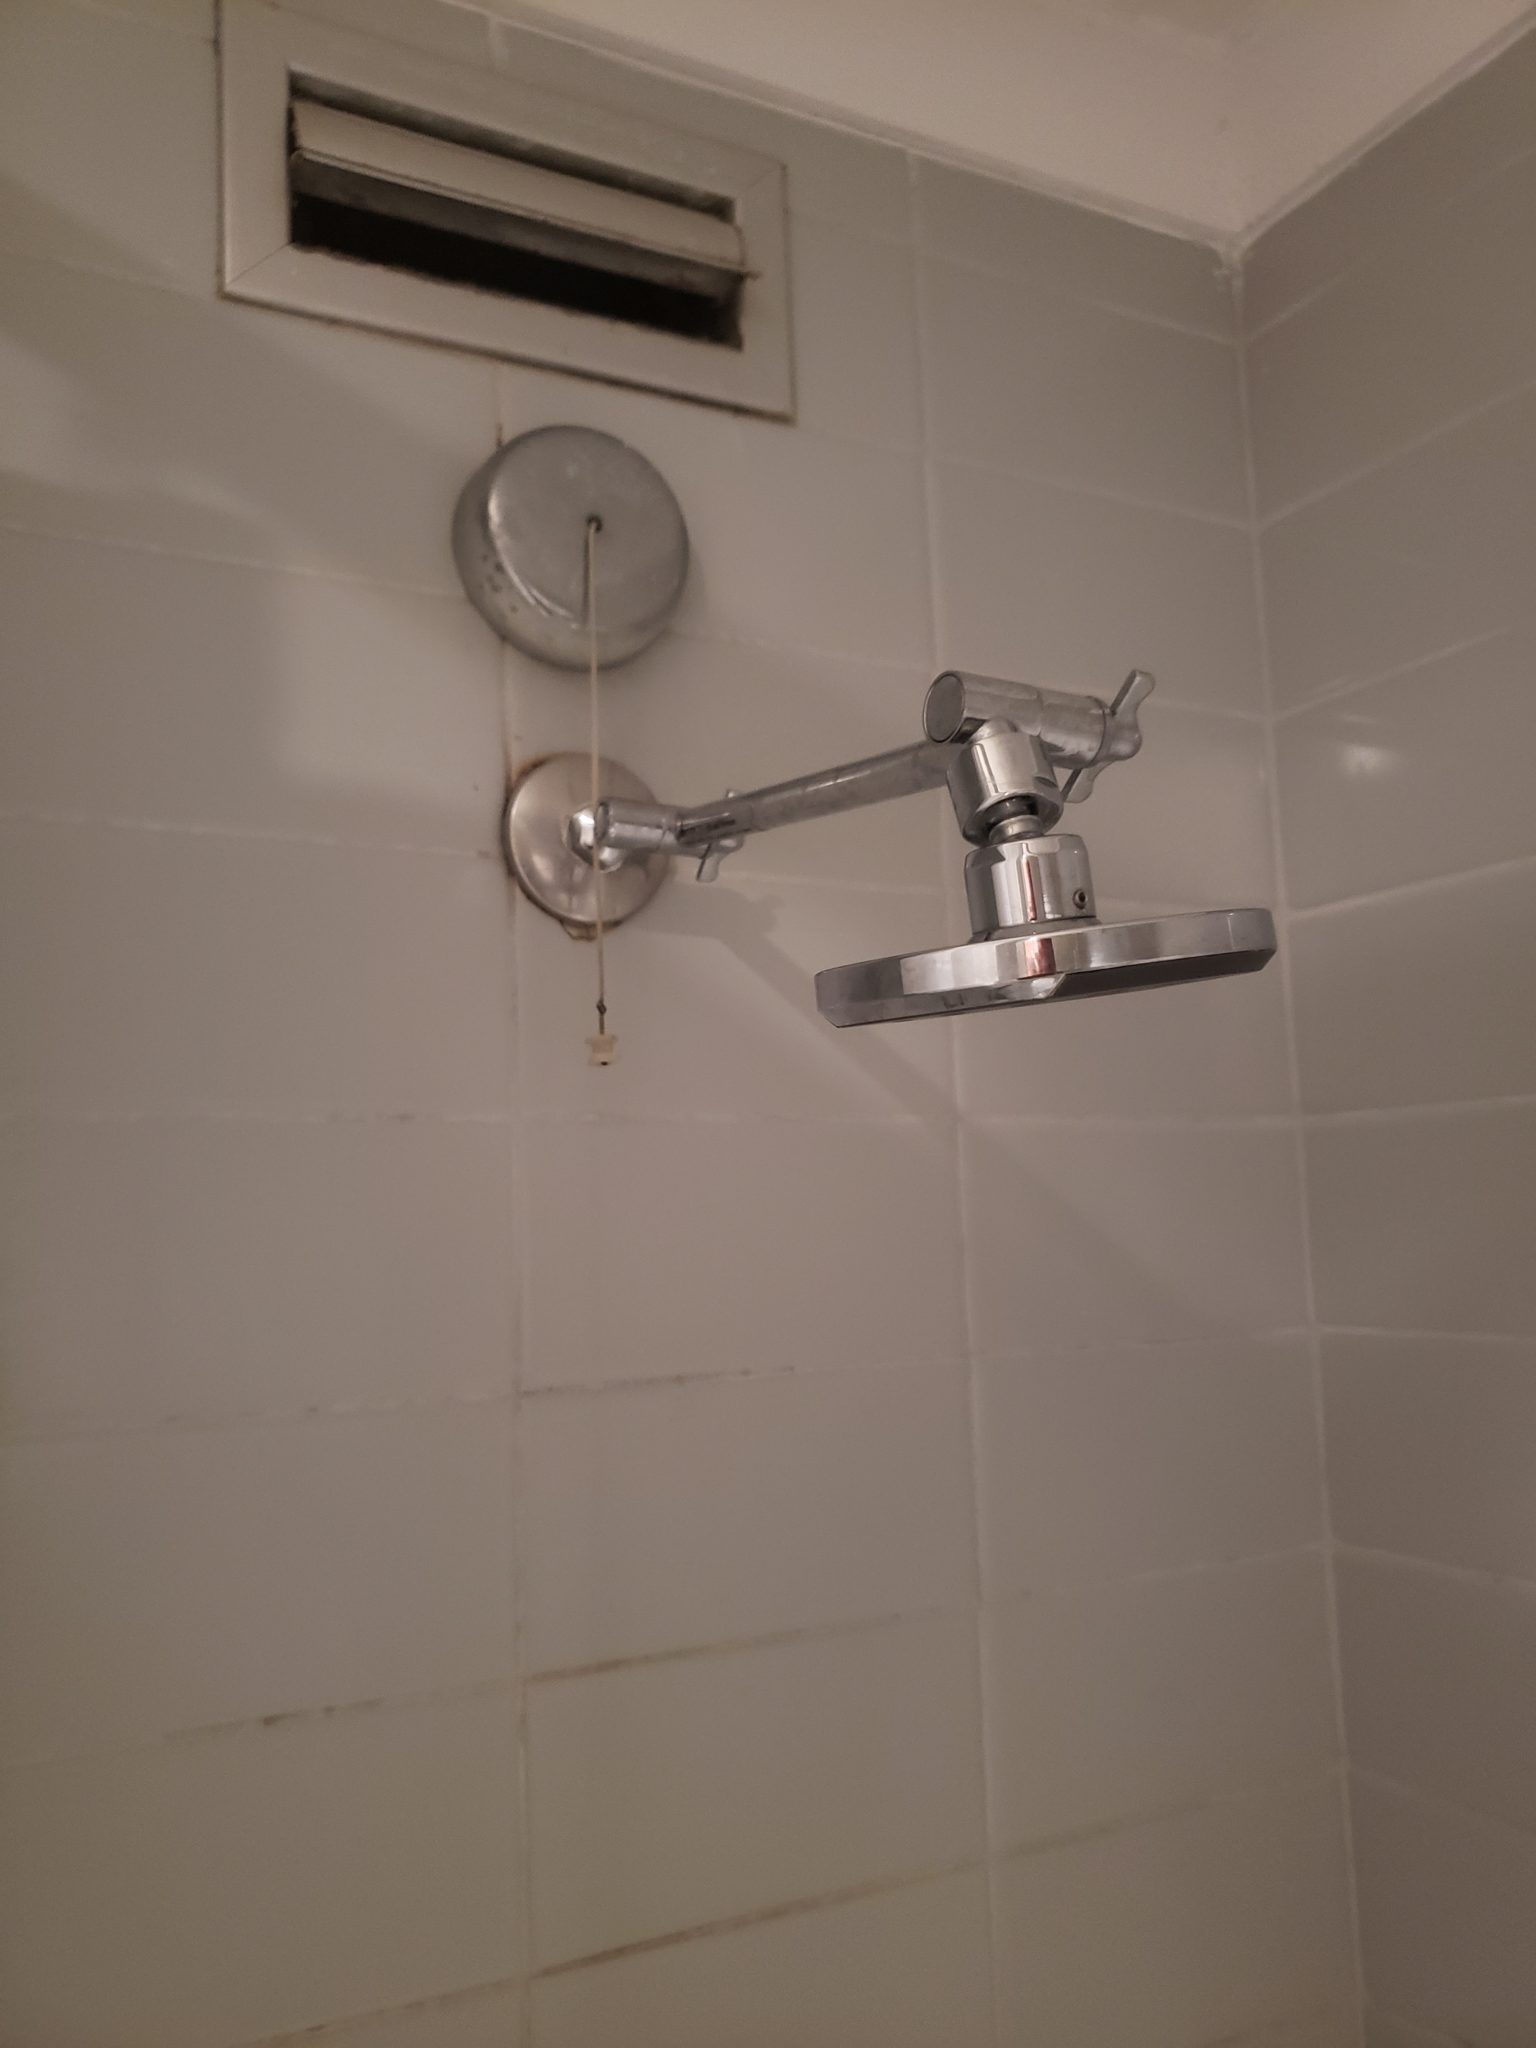 a shower head on a wall